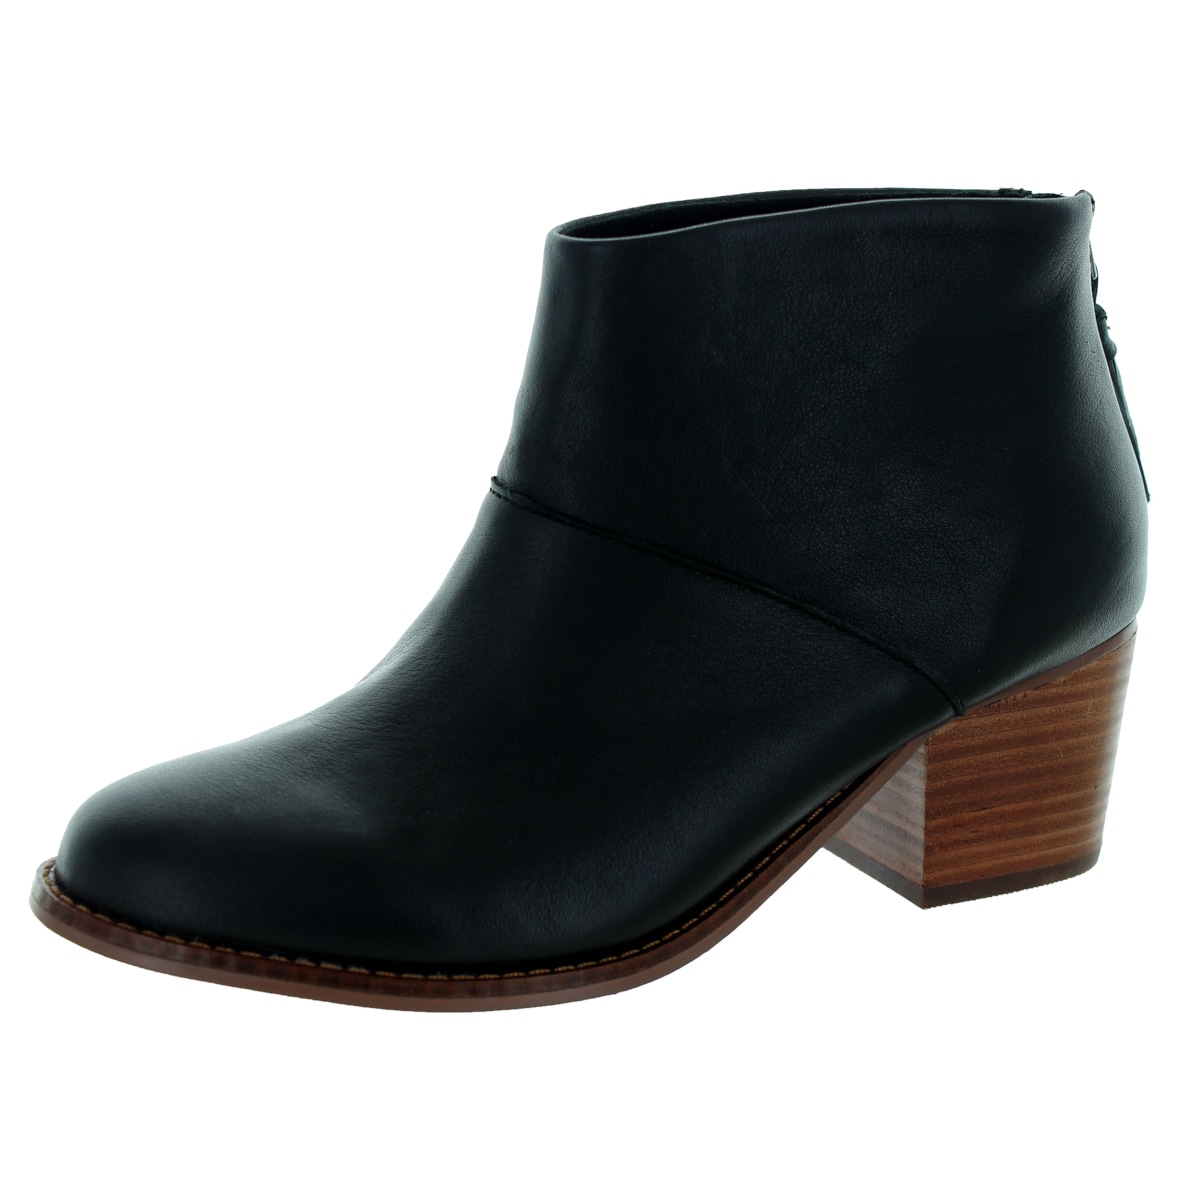 Leila Black Leather Boots - Overstock 